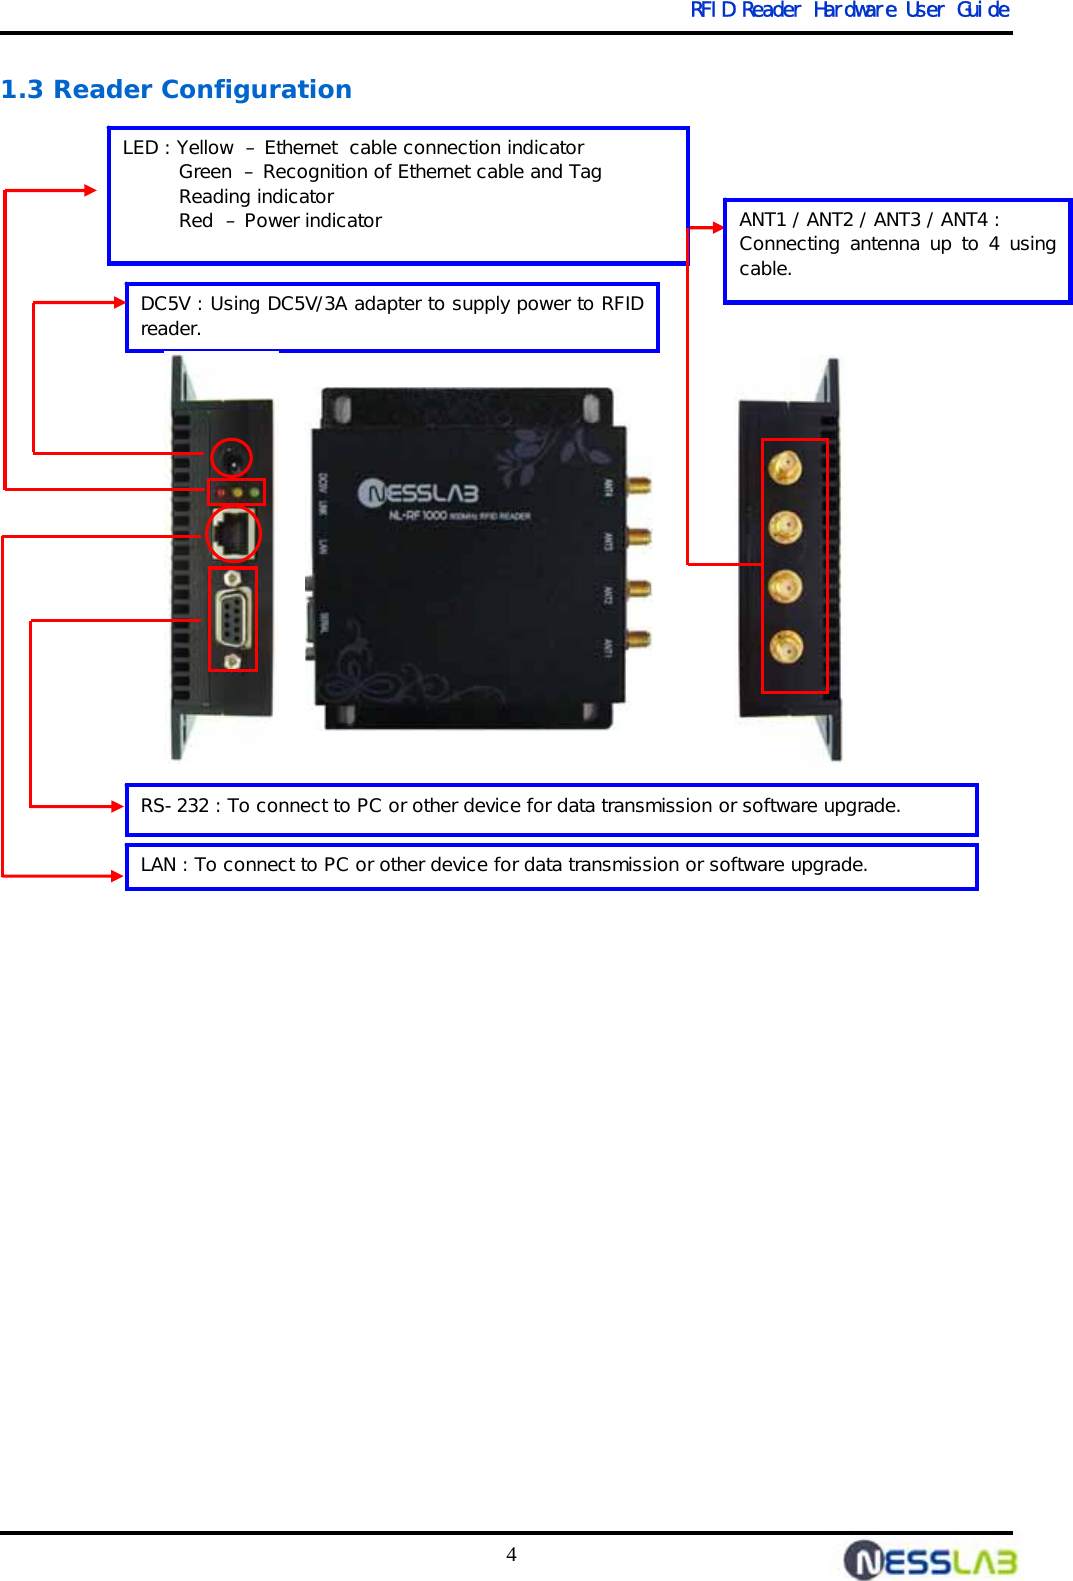   RFID Reader Hardware User Guide 4 1.3 Reader Configuration                     ANT1 / ANT2 / ANT3 / ANT4 : Connecting antenna up to 4 using cable. DC5V : Using DC5V/3A adapter to supply power to RFID reader.  LED : Yellow  – Ethernet  cable connection indicator Green  – Recognition of Ethernet cable and Tag  Reading indicator          Red  – Power indicator LAN : To connect to PC or other device for data transmission or software upgrade.    RS-232 : To connect to PC or other device for data transmission or software upgrade.  